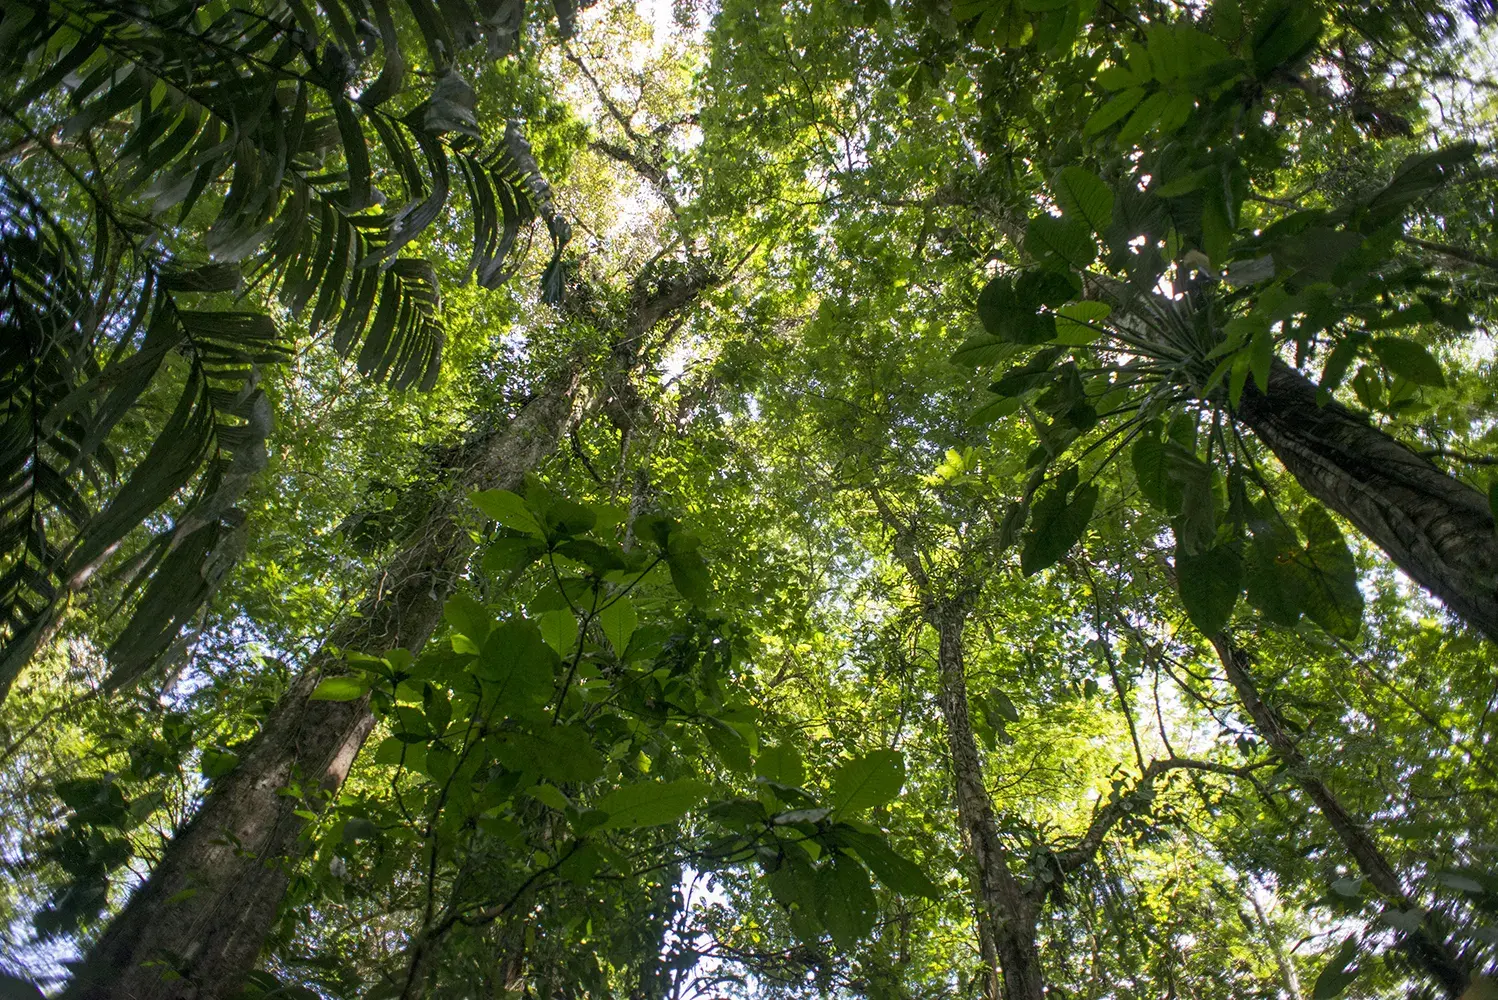 Costa Rica signs agreement to reduce emissions, conserve forests 